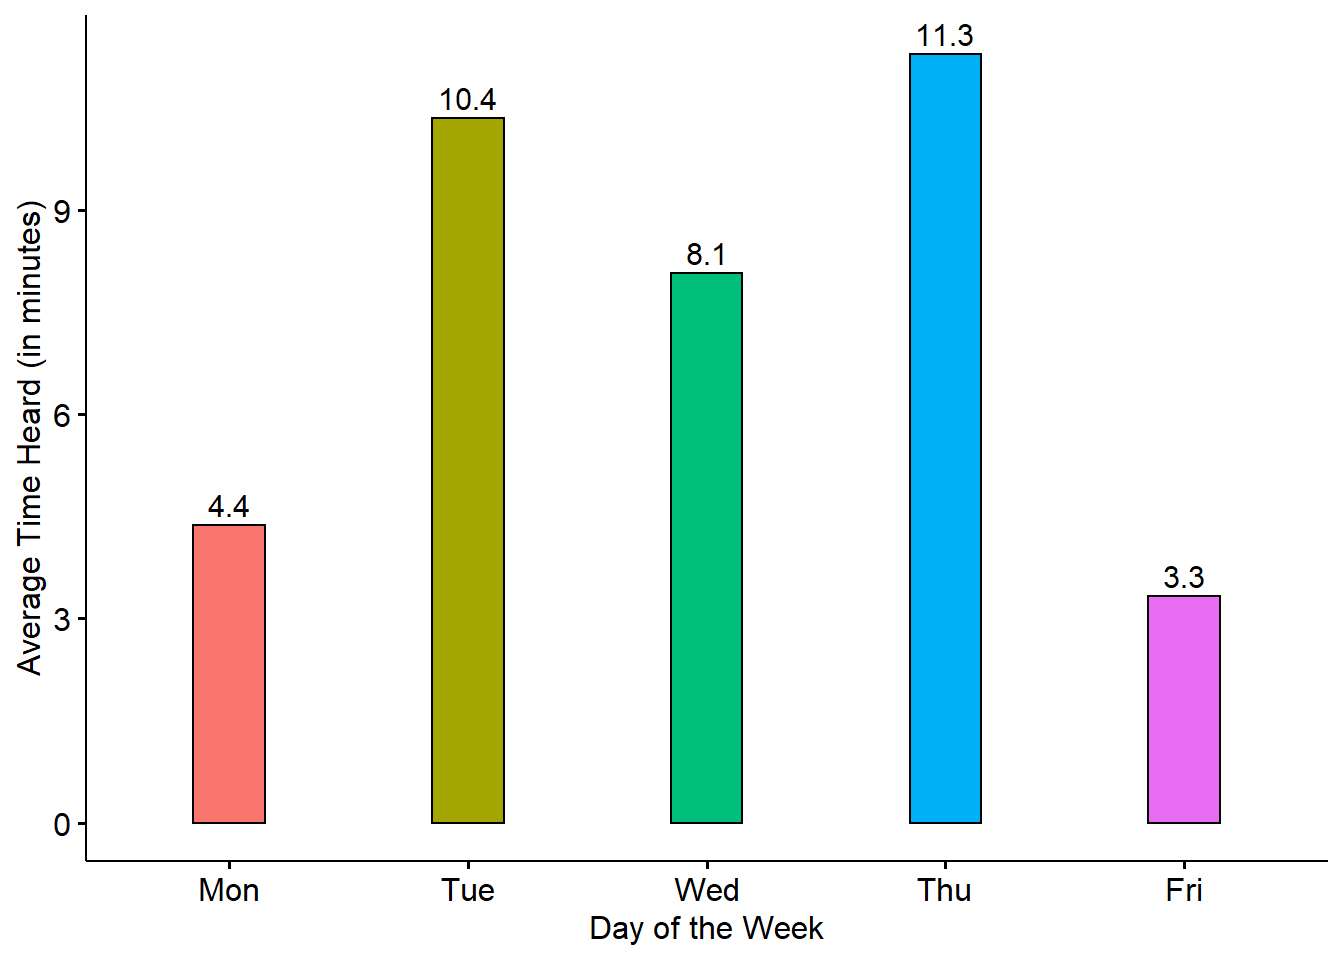 Average Hearing Time by Day of the Week